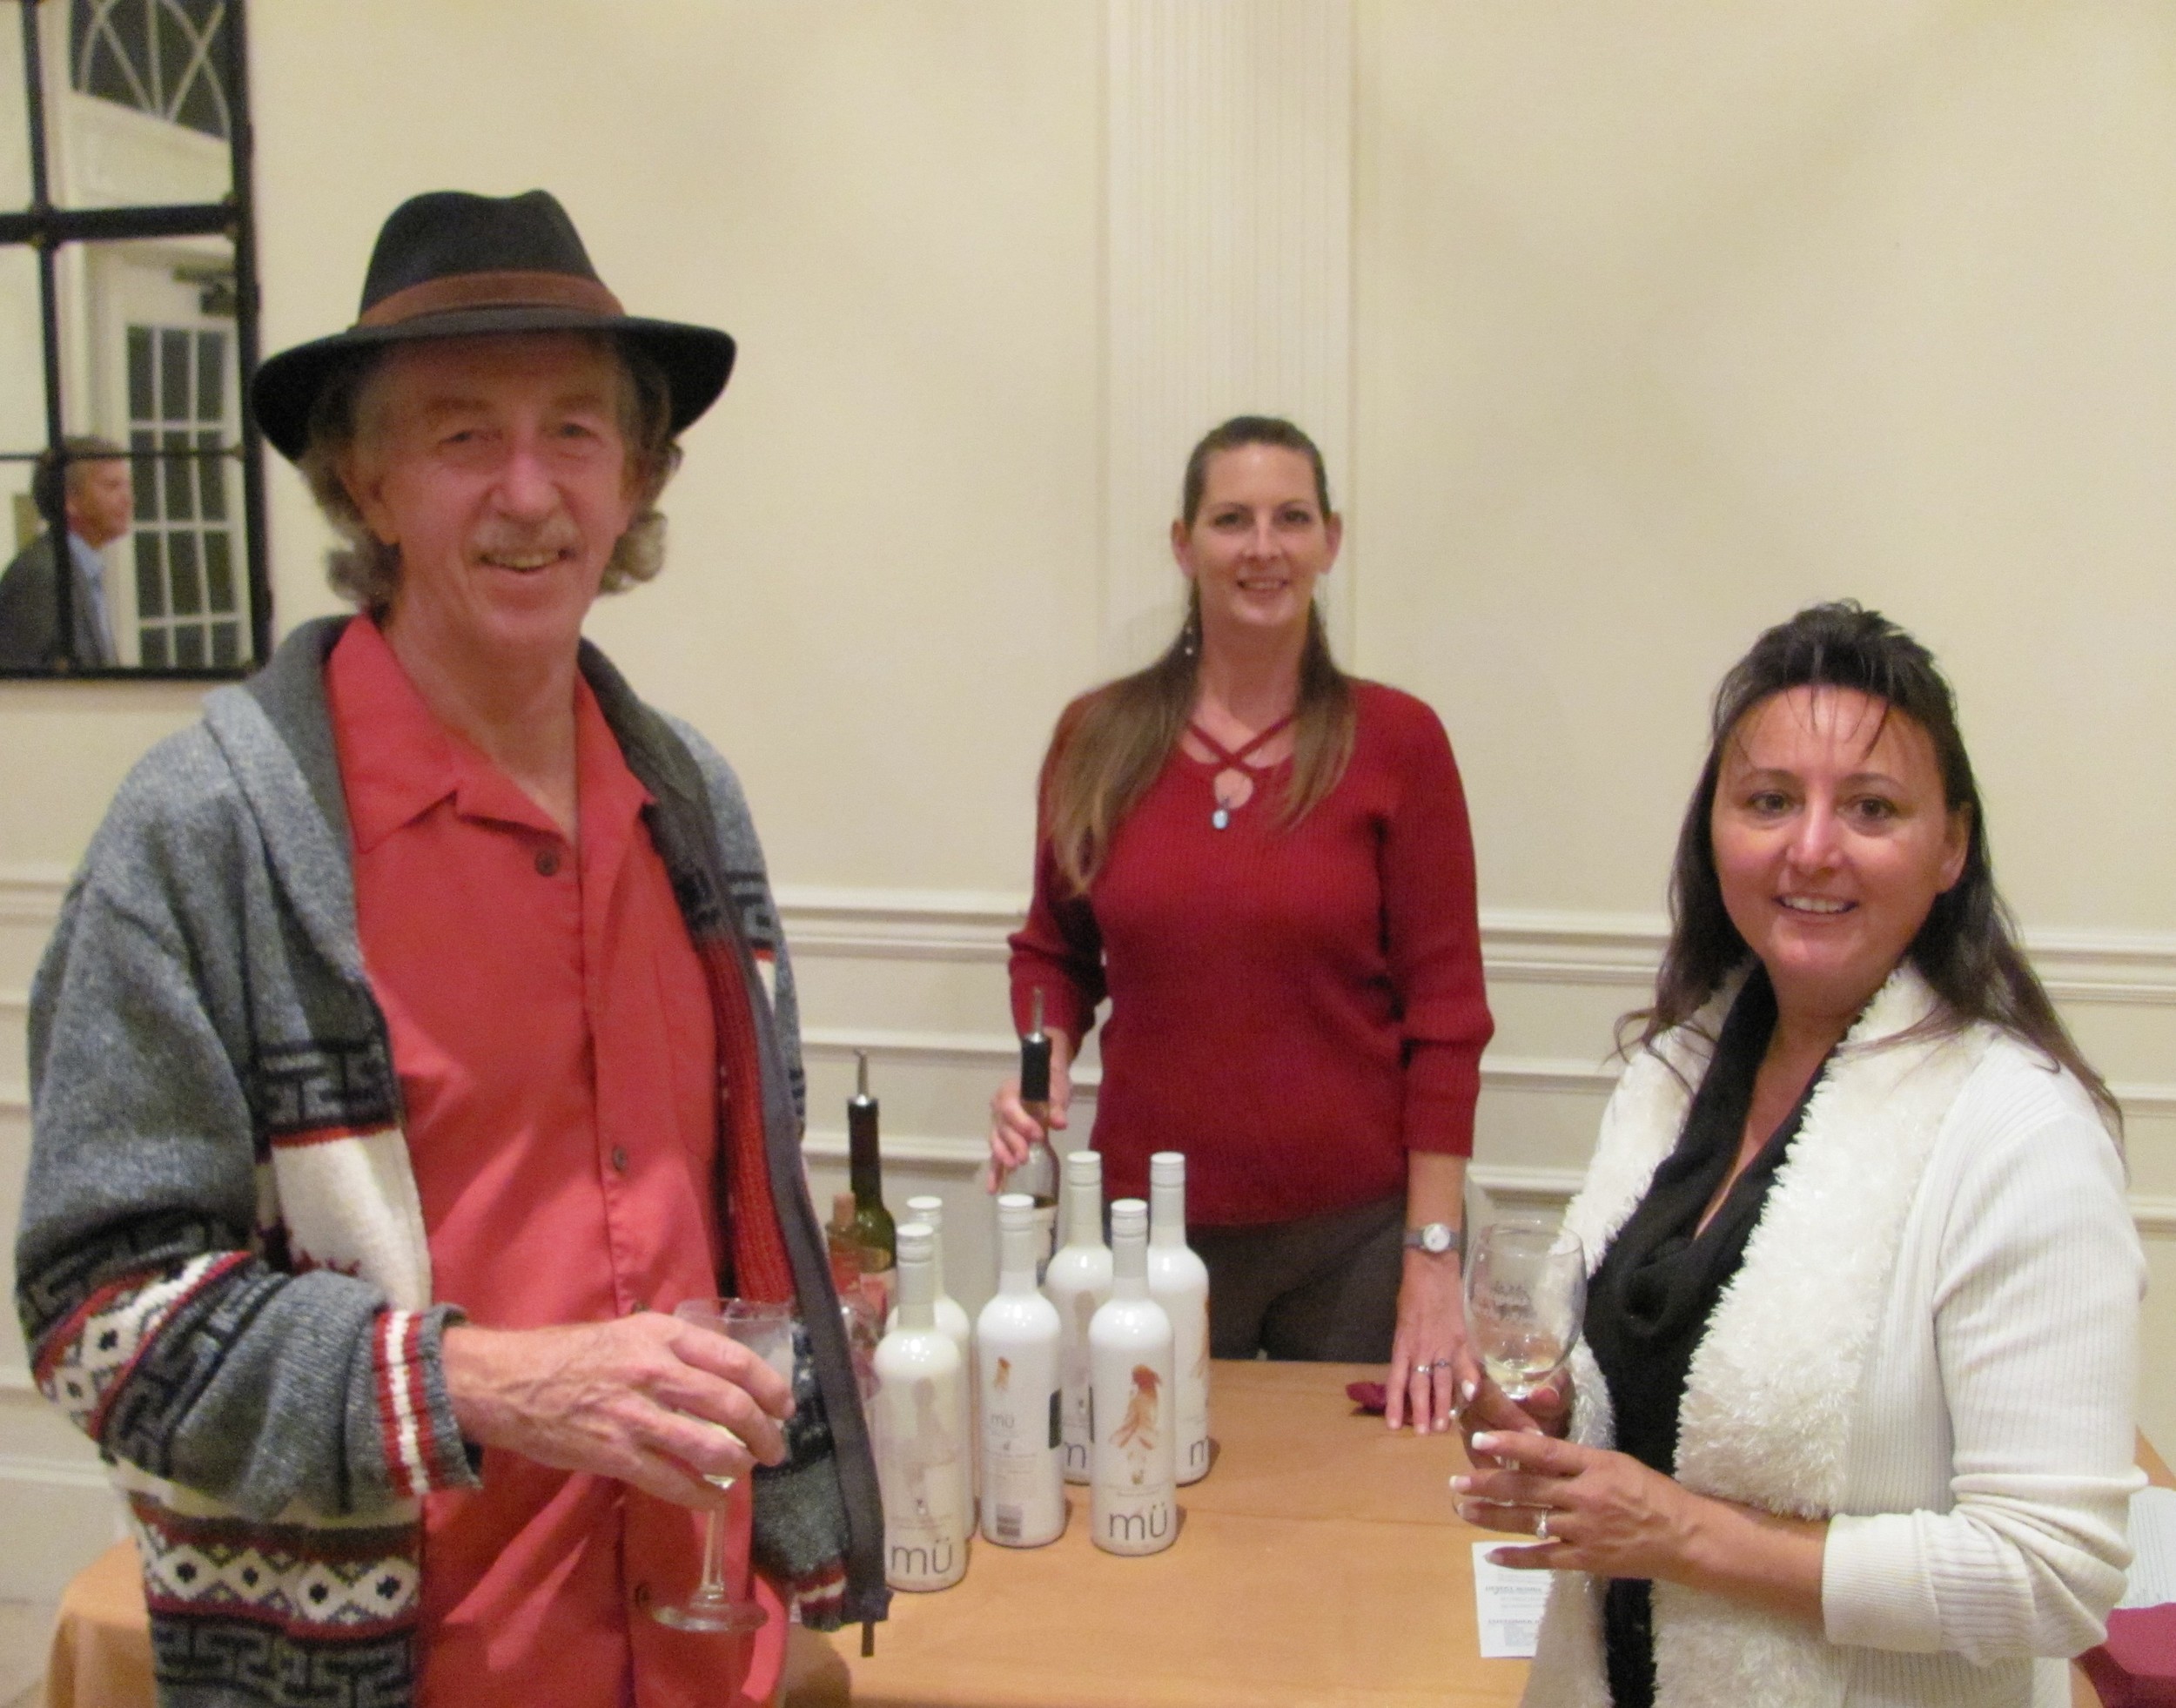 Daryl (left) and Susan (right) Perritt sample wine from Vino Del Grotto Winery thanks to the help of Deb Broyer (center).